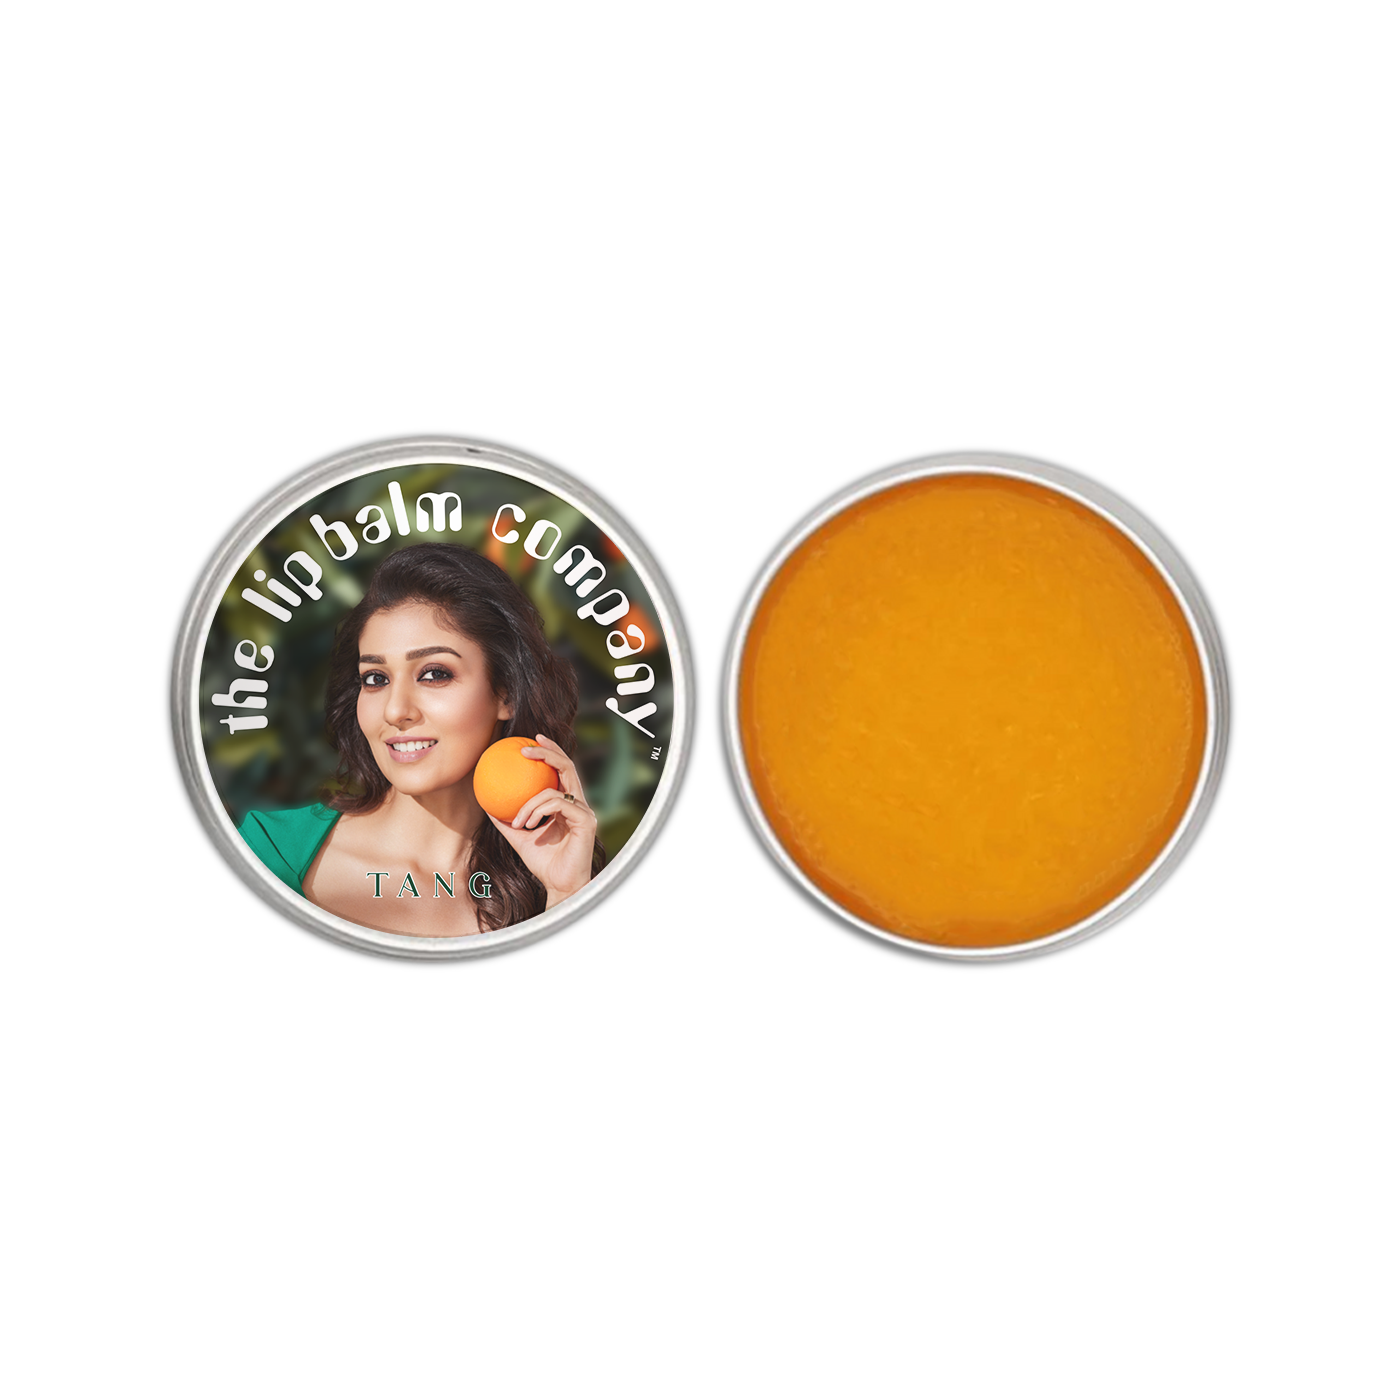 Tang lip balm for lip conditioning